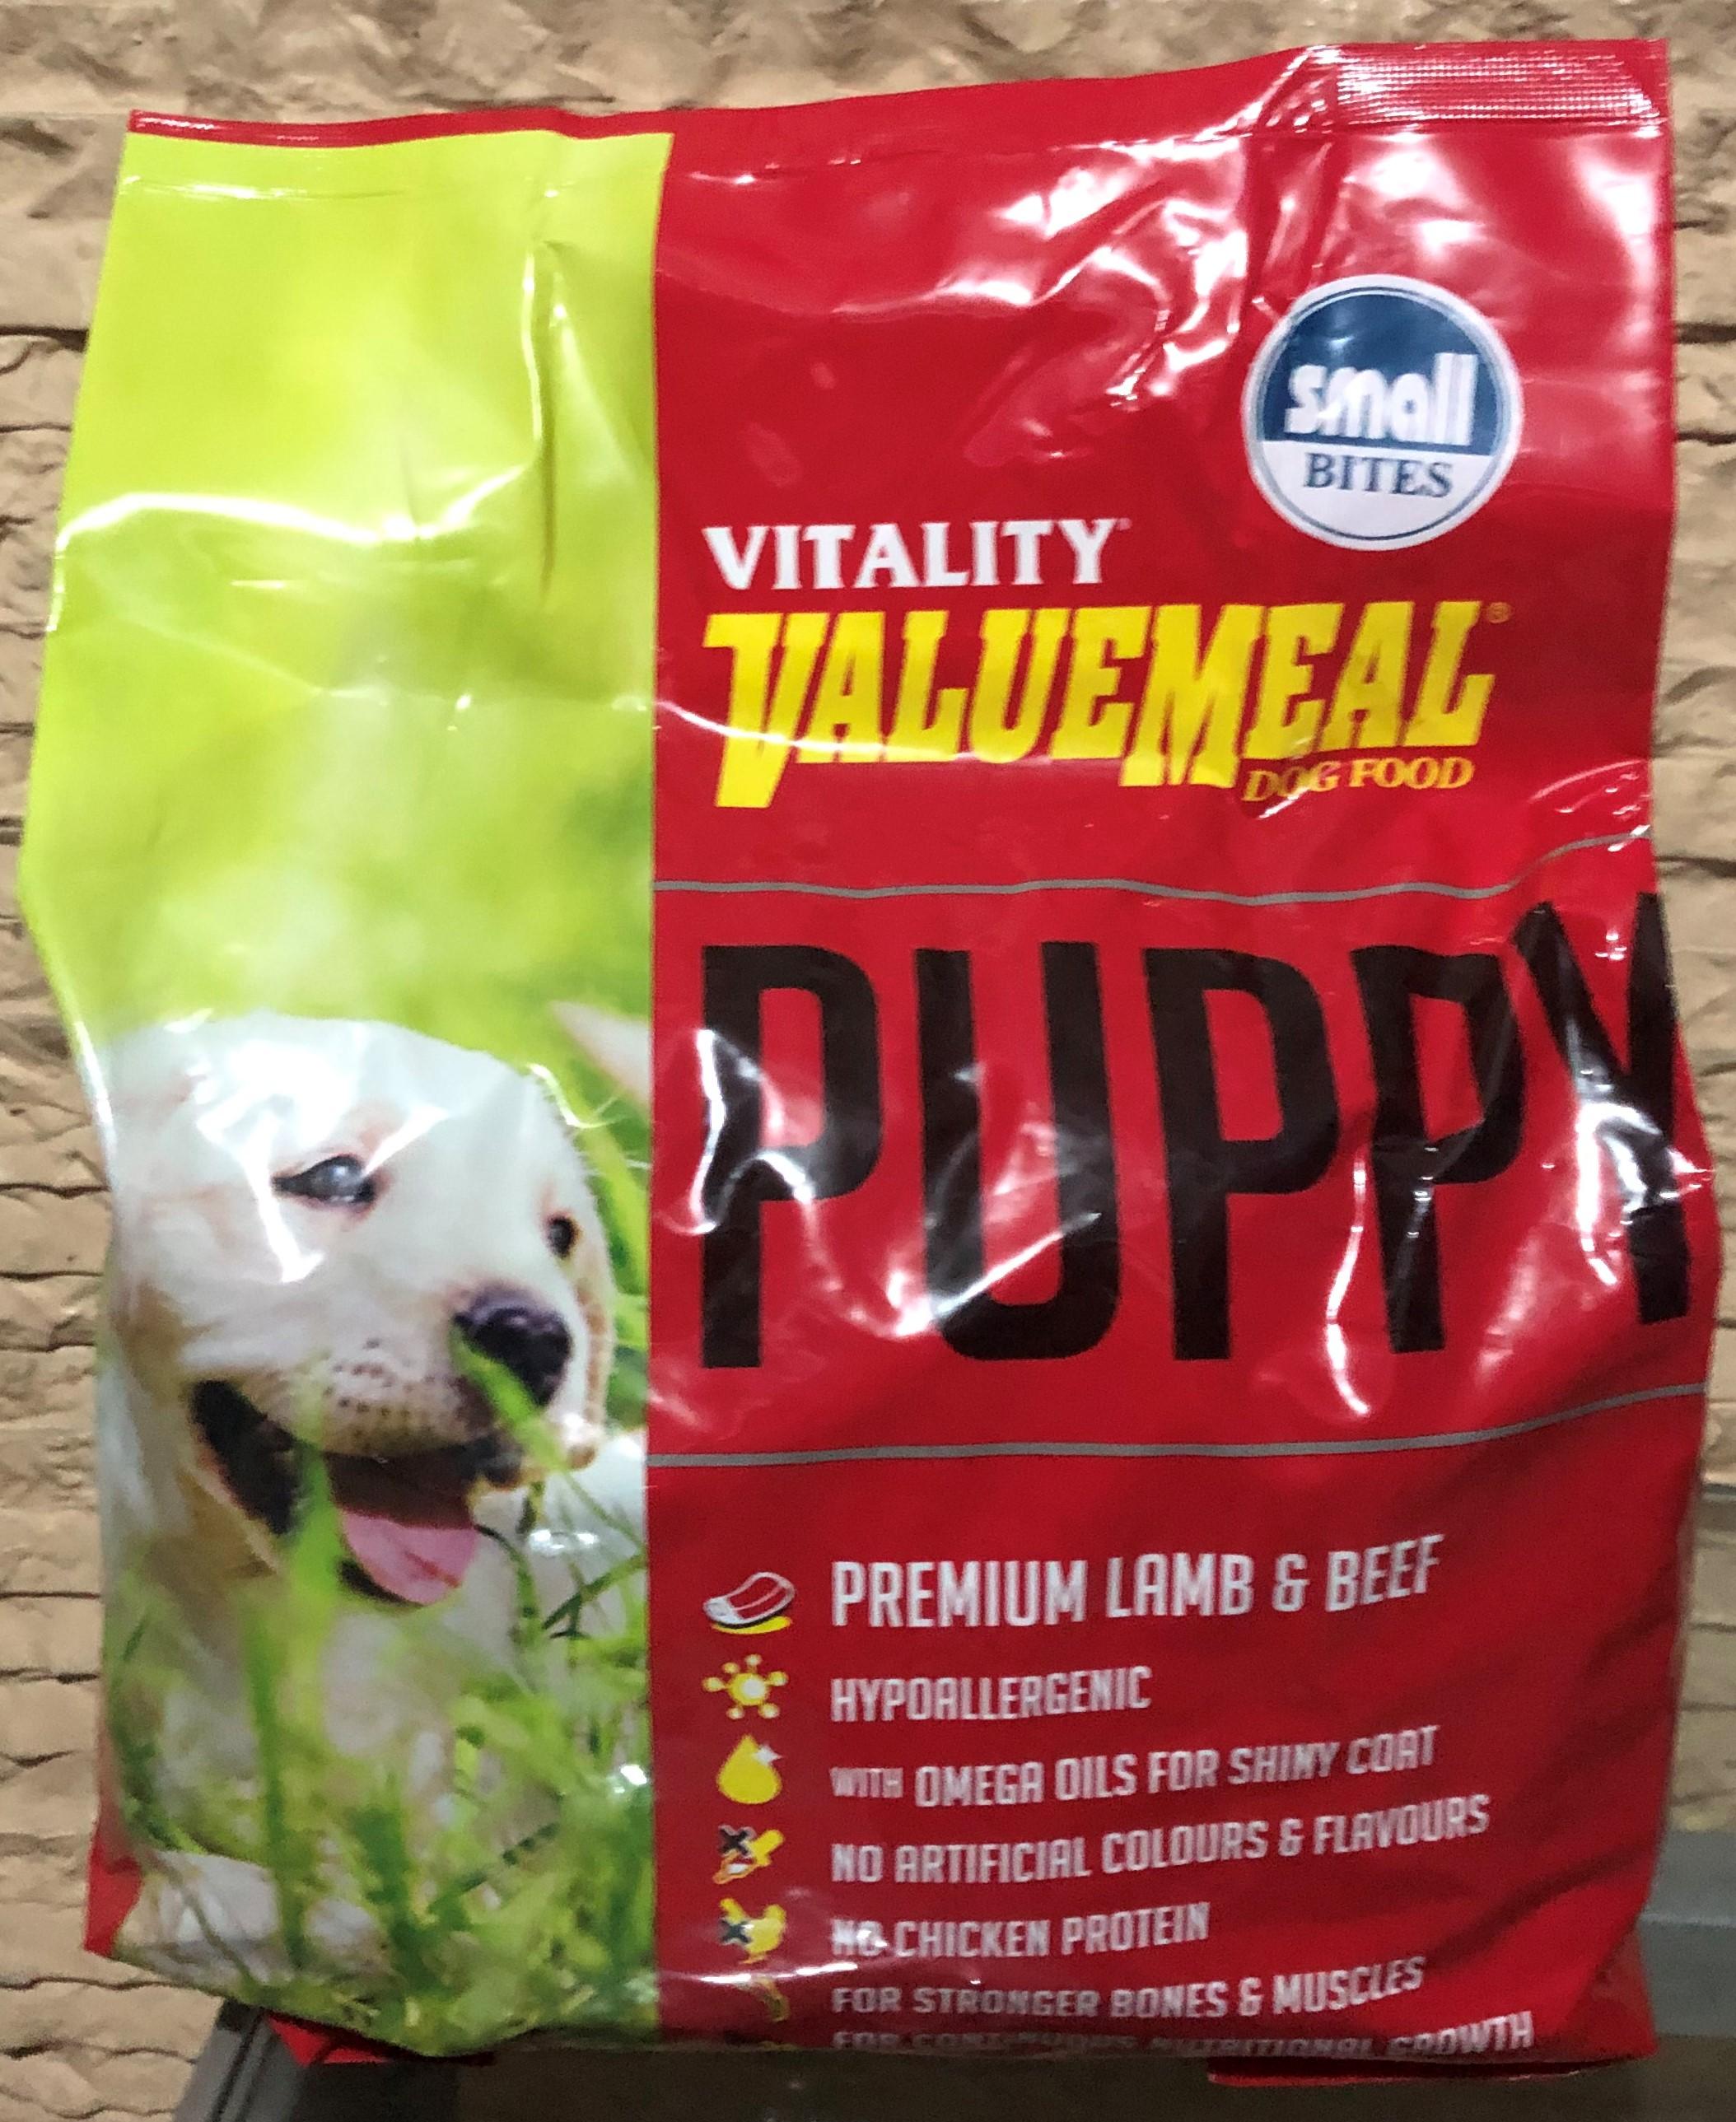 Vitality Value Meal Puppy Dry Dog Food 